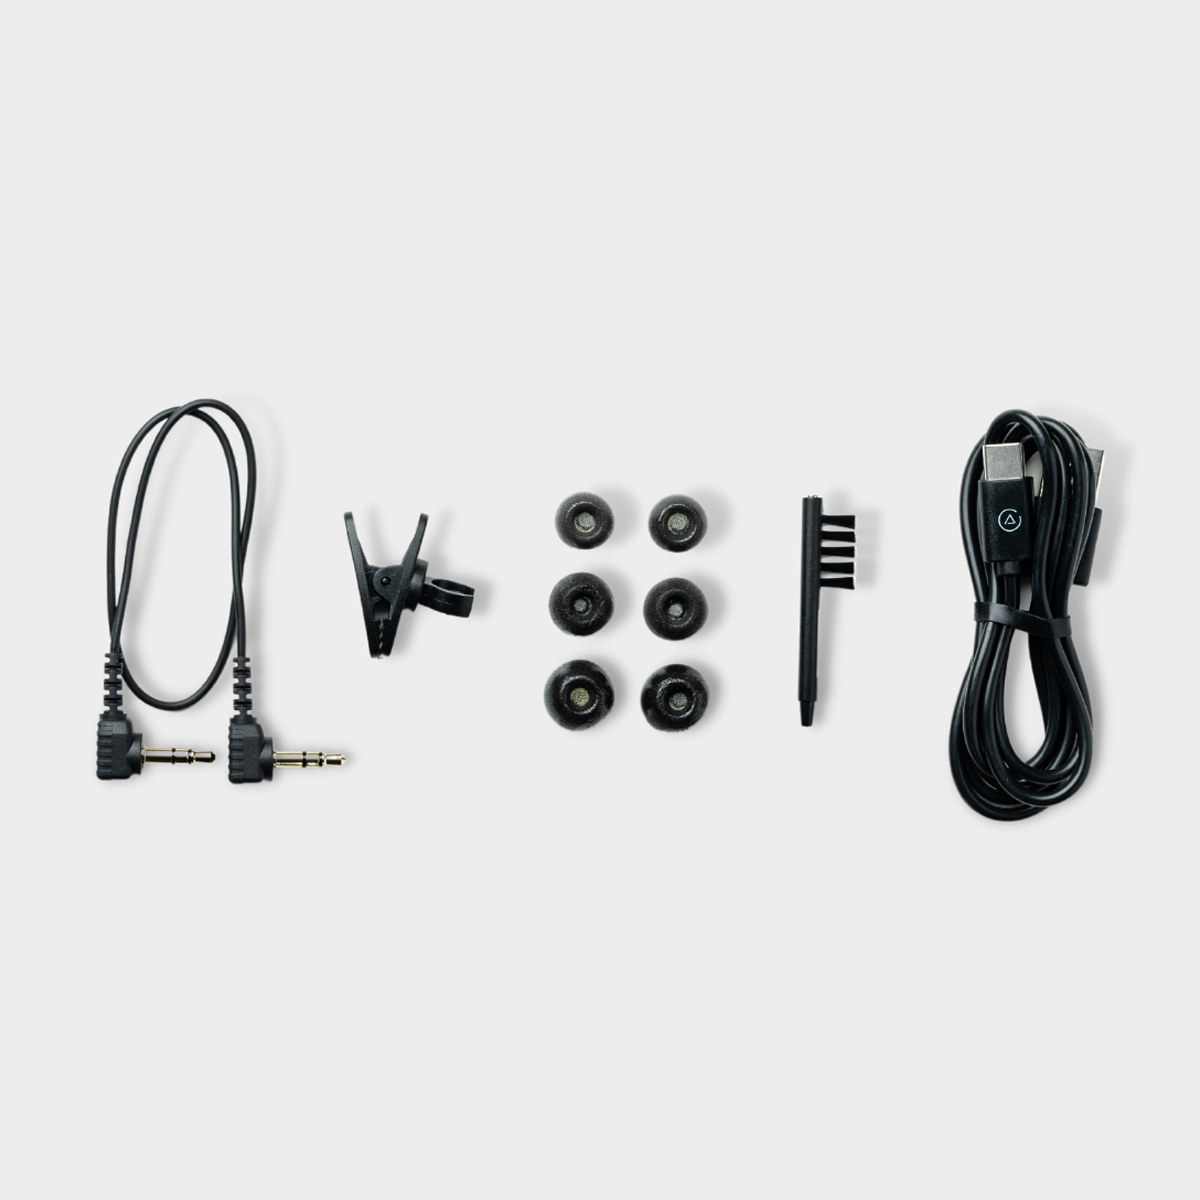 3DME In-Ear Monitor System